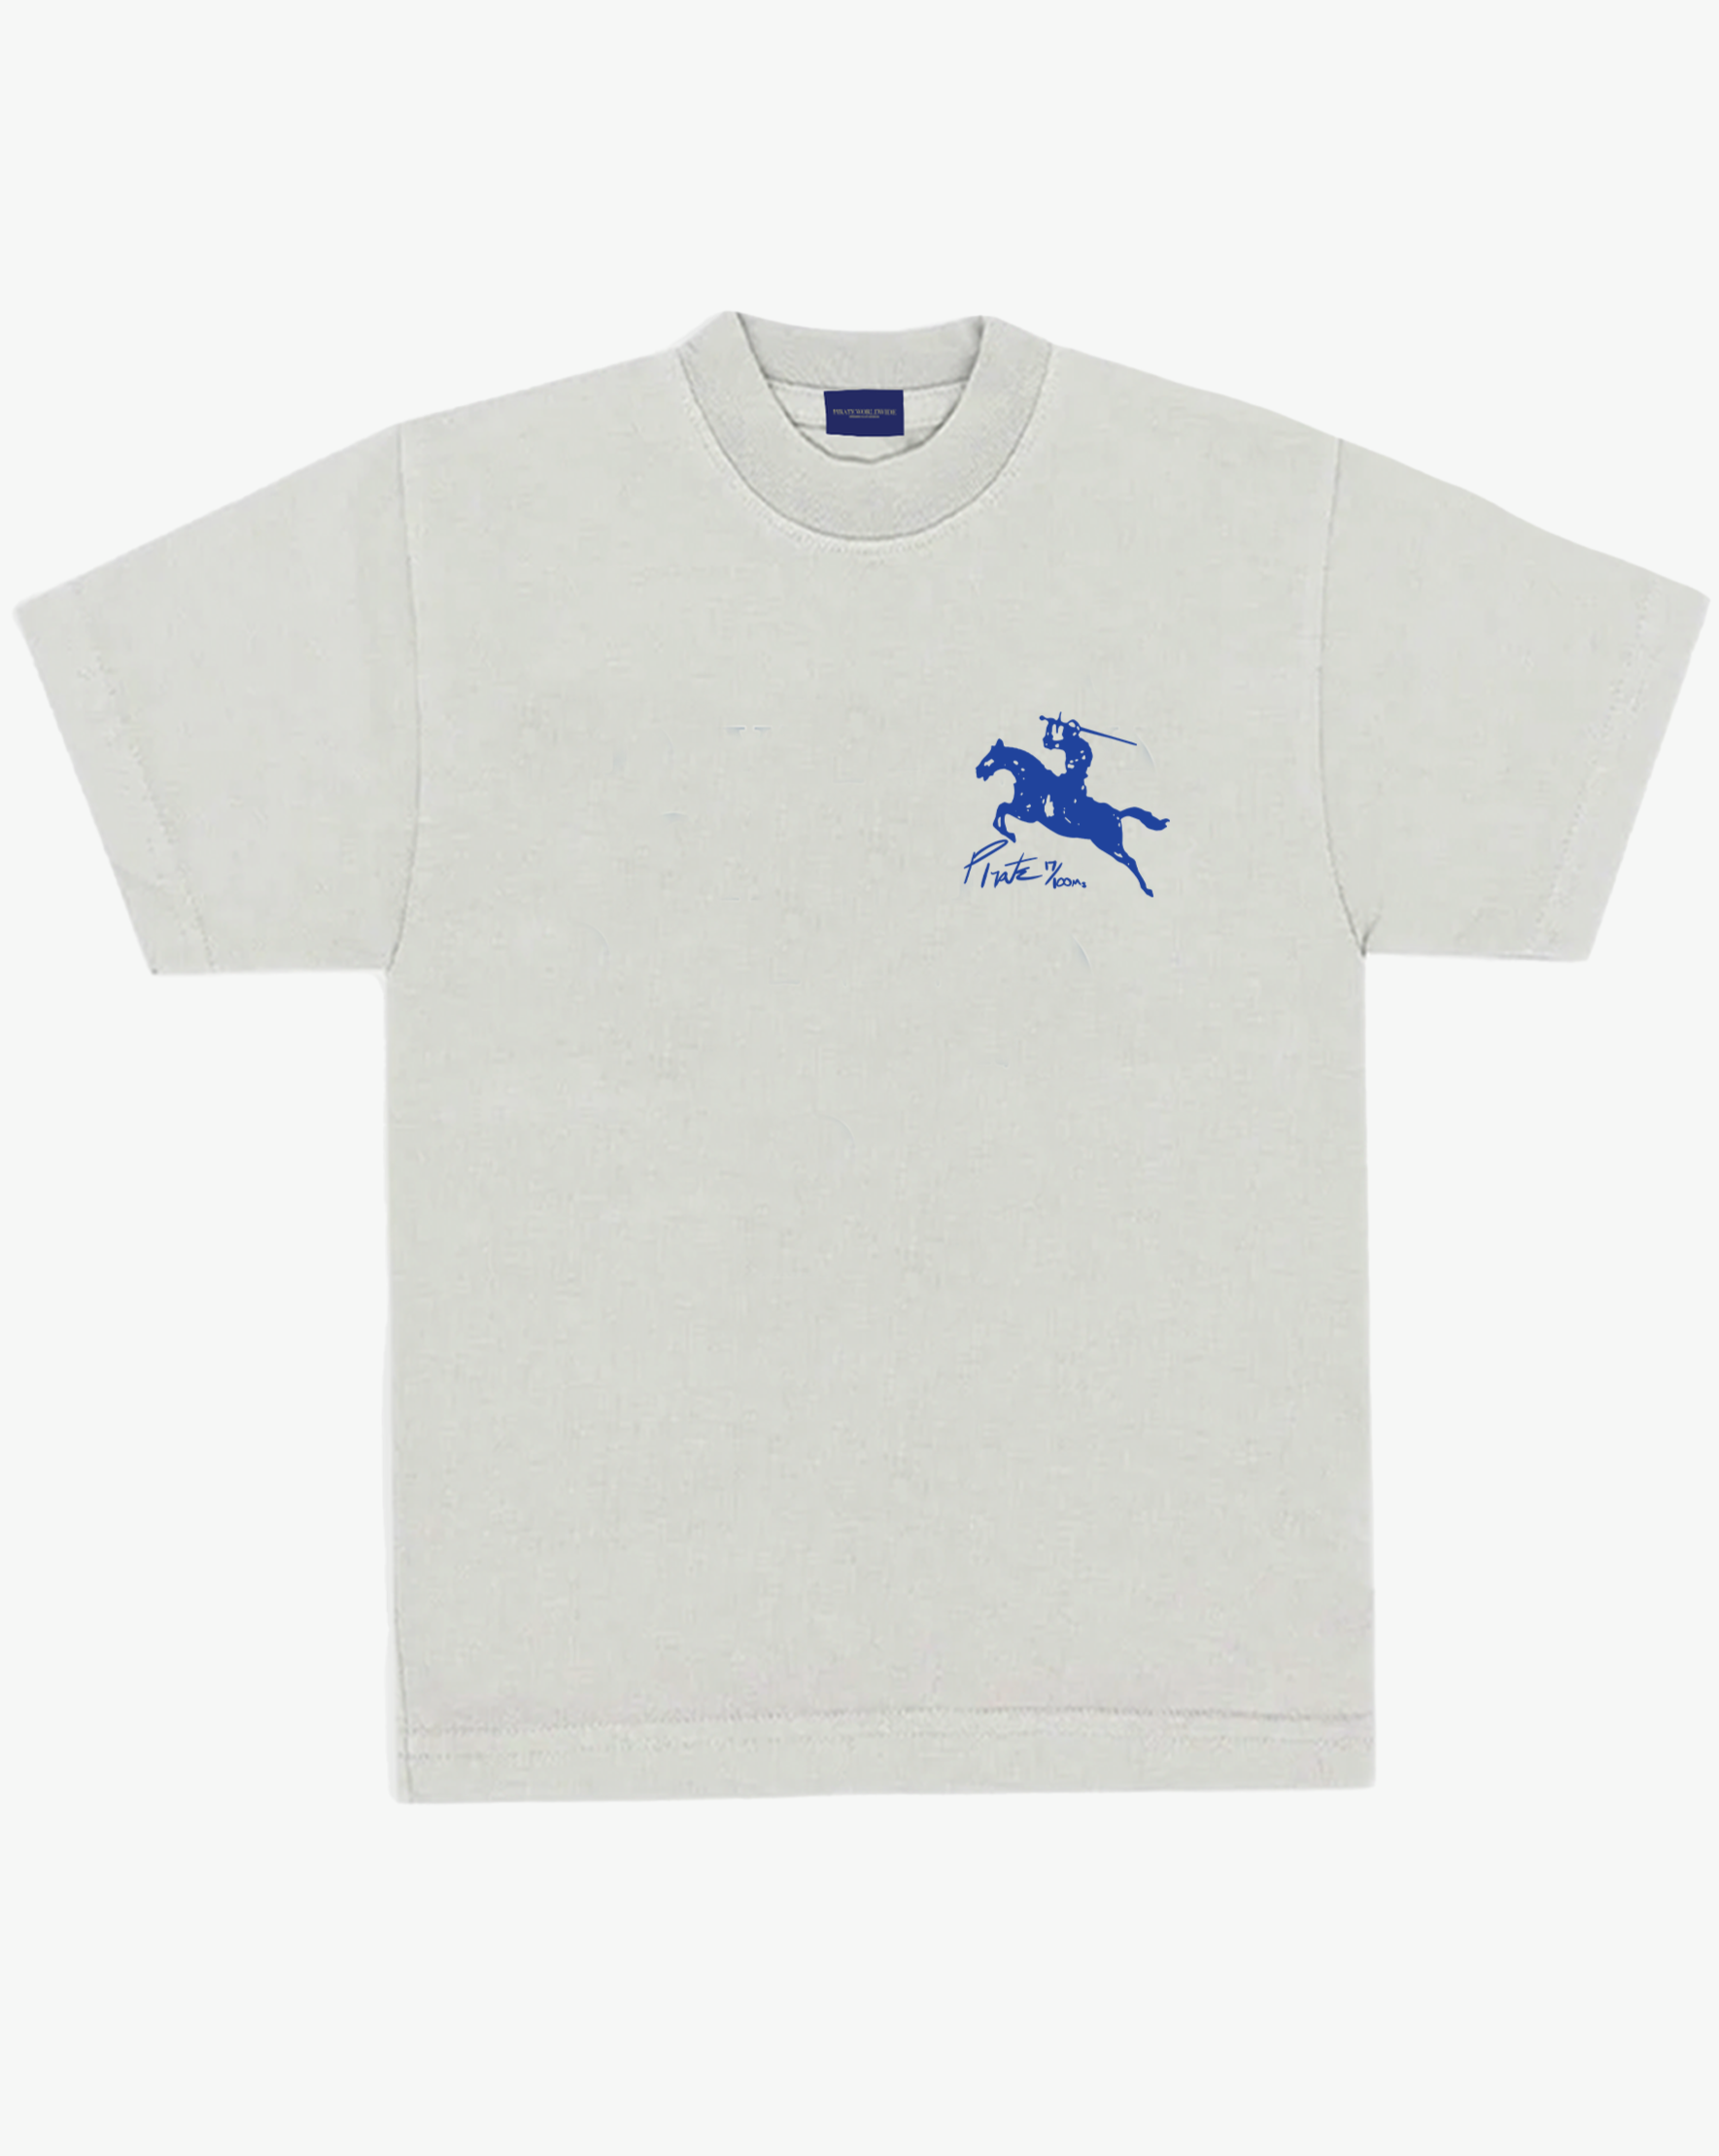 Pirate By Any Means Tee (Blue)